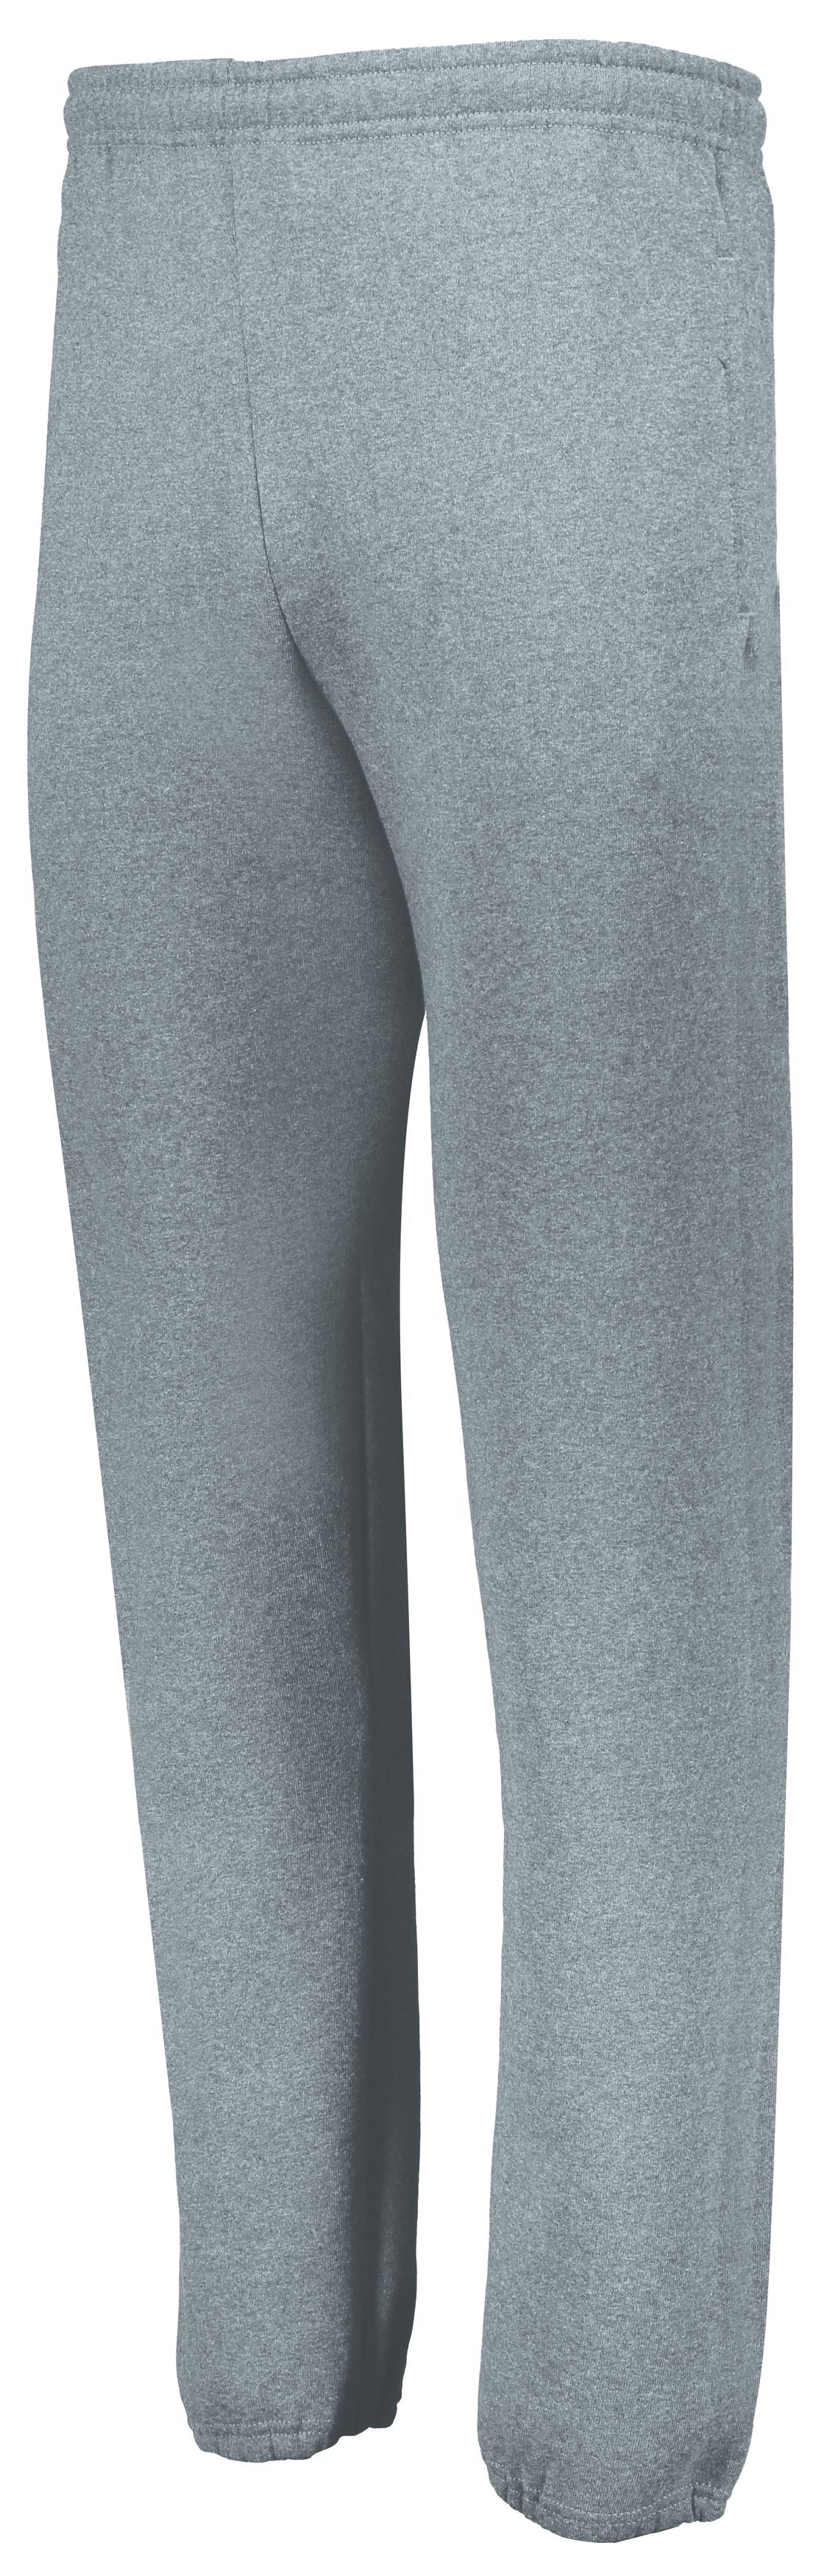 Russell Athletic Dri-Power Closed Bottom Pocket Sweatpant in Oxford  -Part of the Adult, Adult-Pants, Pants, Russell-Athletic-Products product lines at KanaleyCreations.com